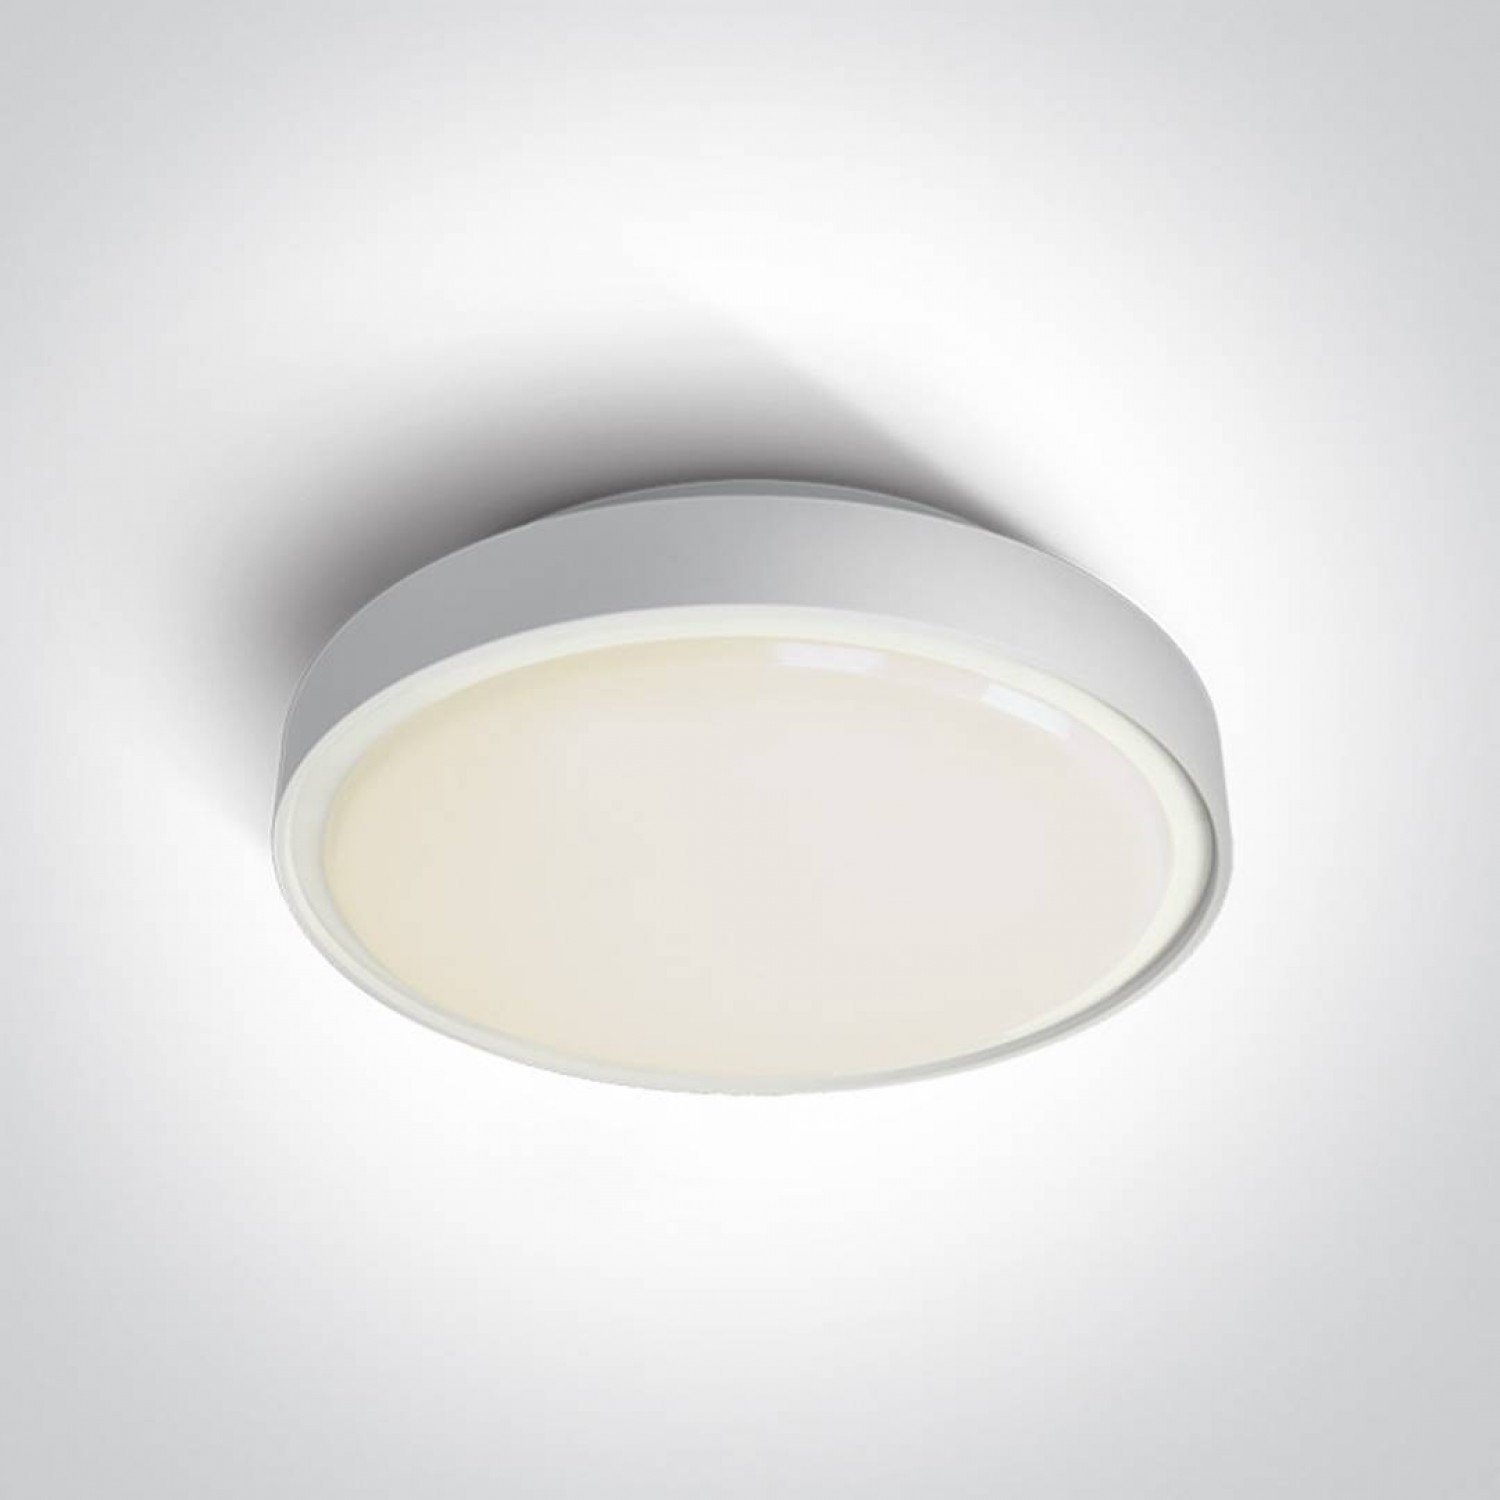 alt_image Світильник ONE Light The LED Plafo Outdoor Round 67280BN/W/W